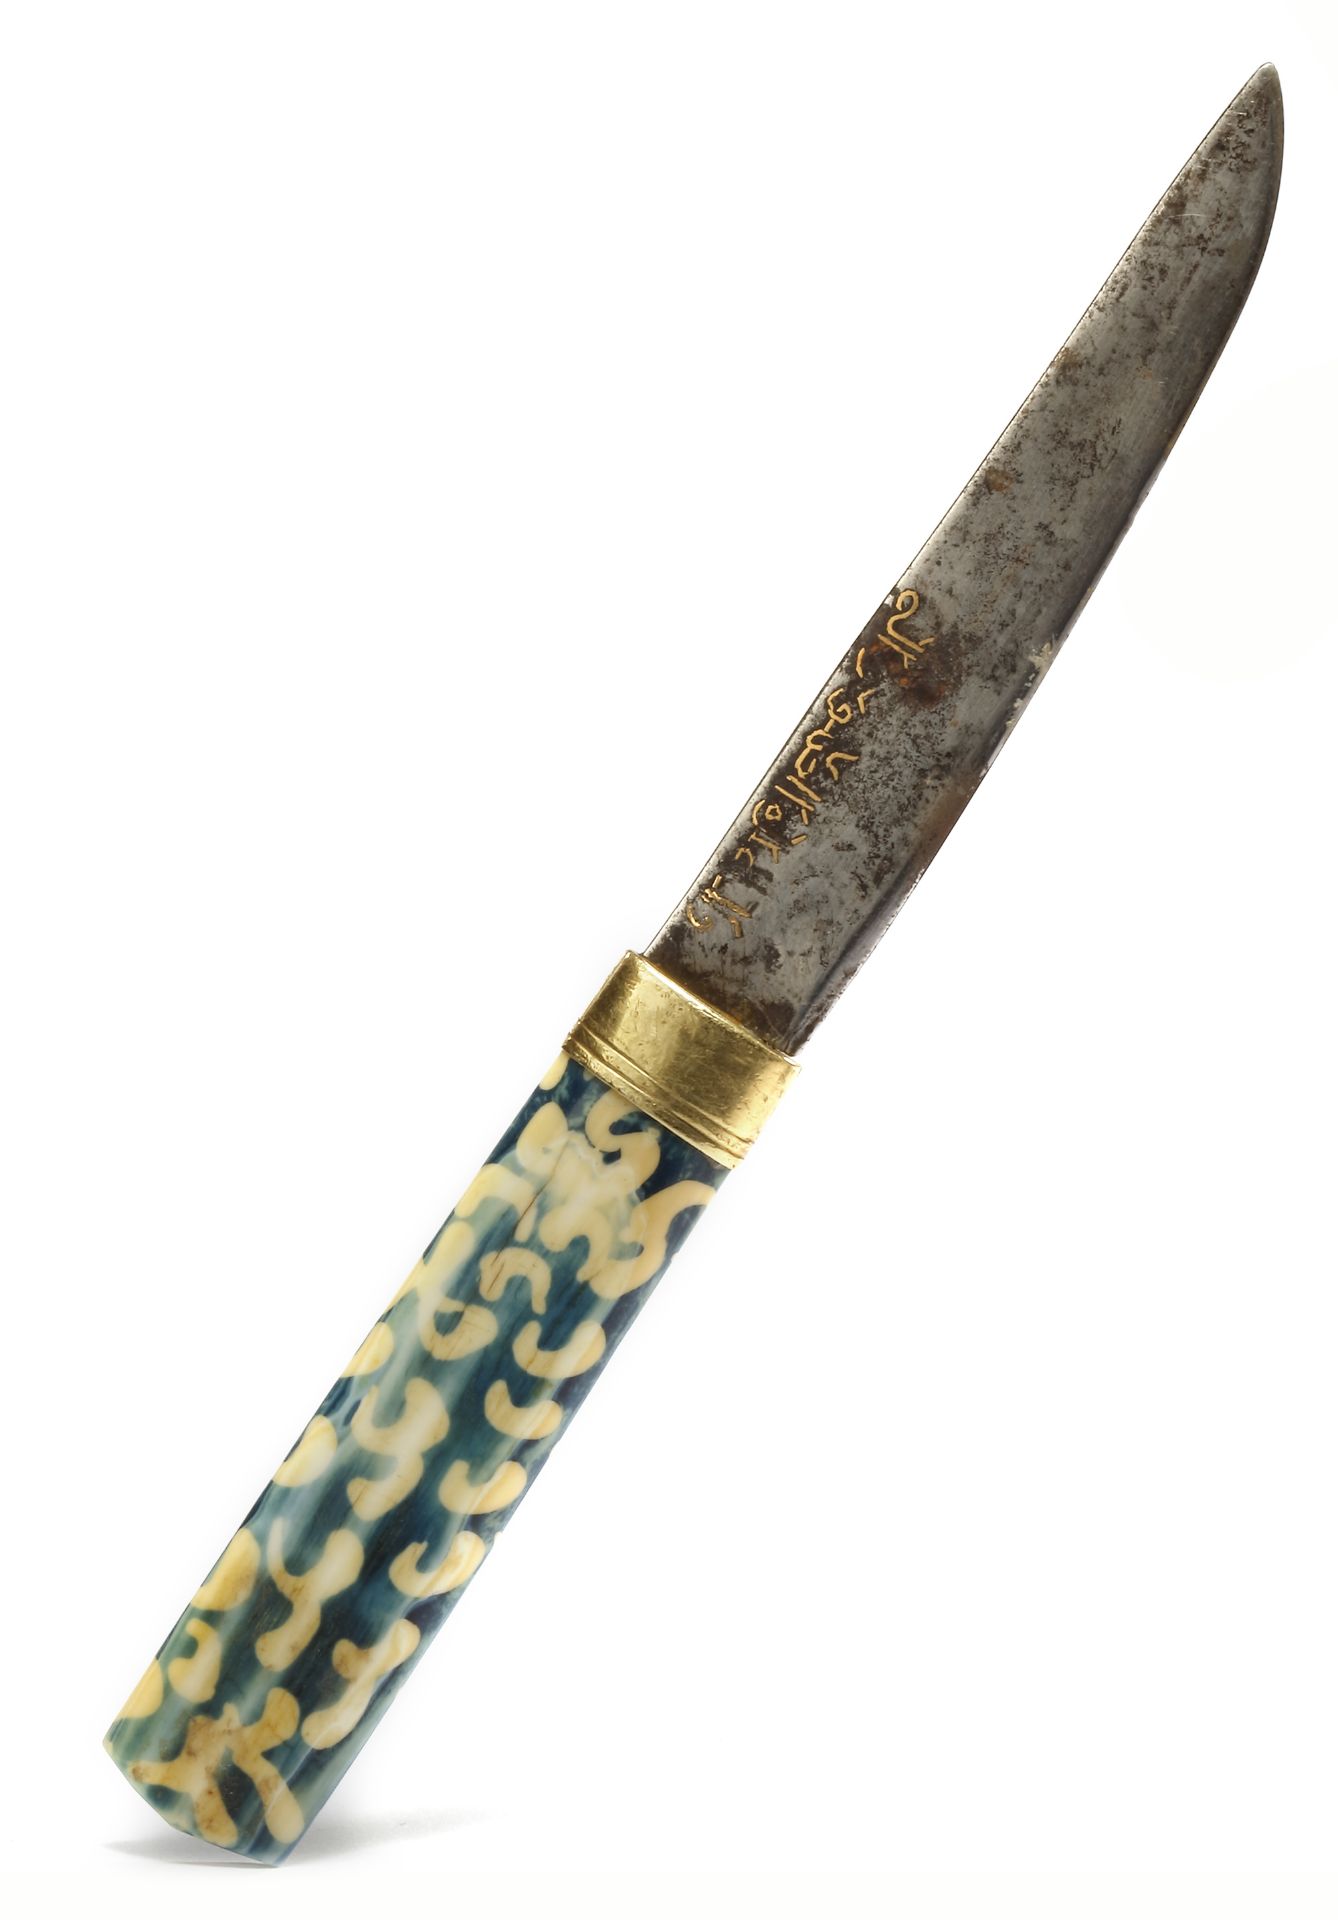 A SMALL INSCRIBED KNIFE, LATE TIMURID, 15TH-16TH CENTURY